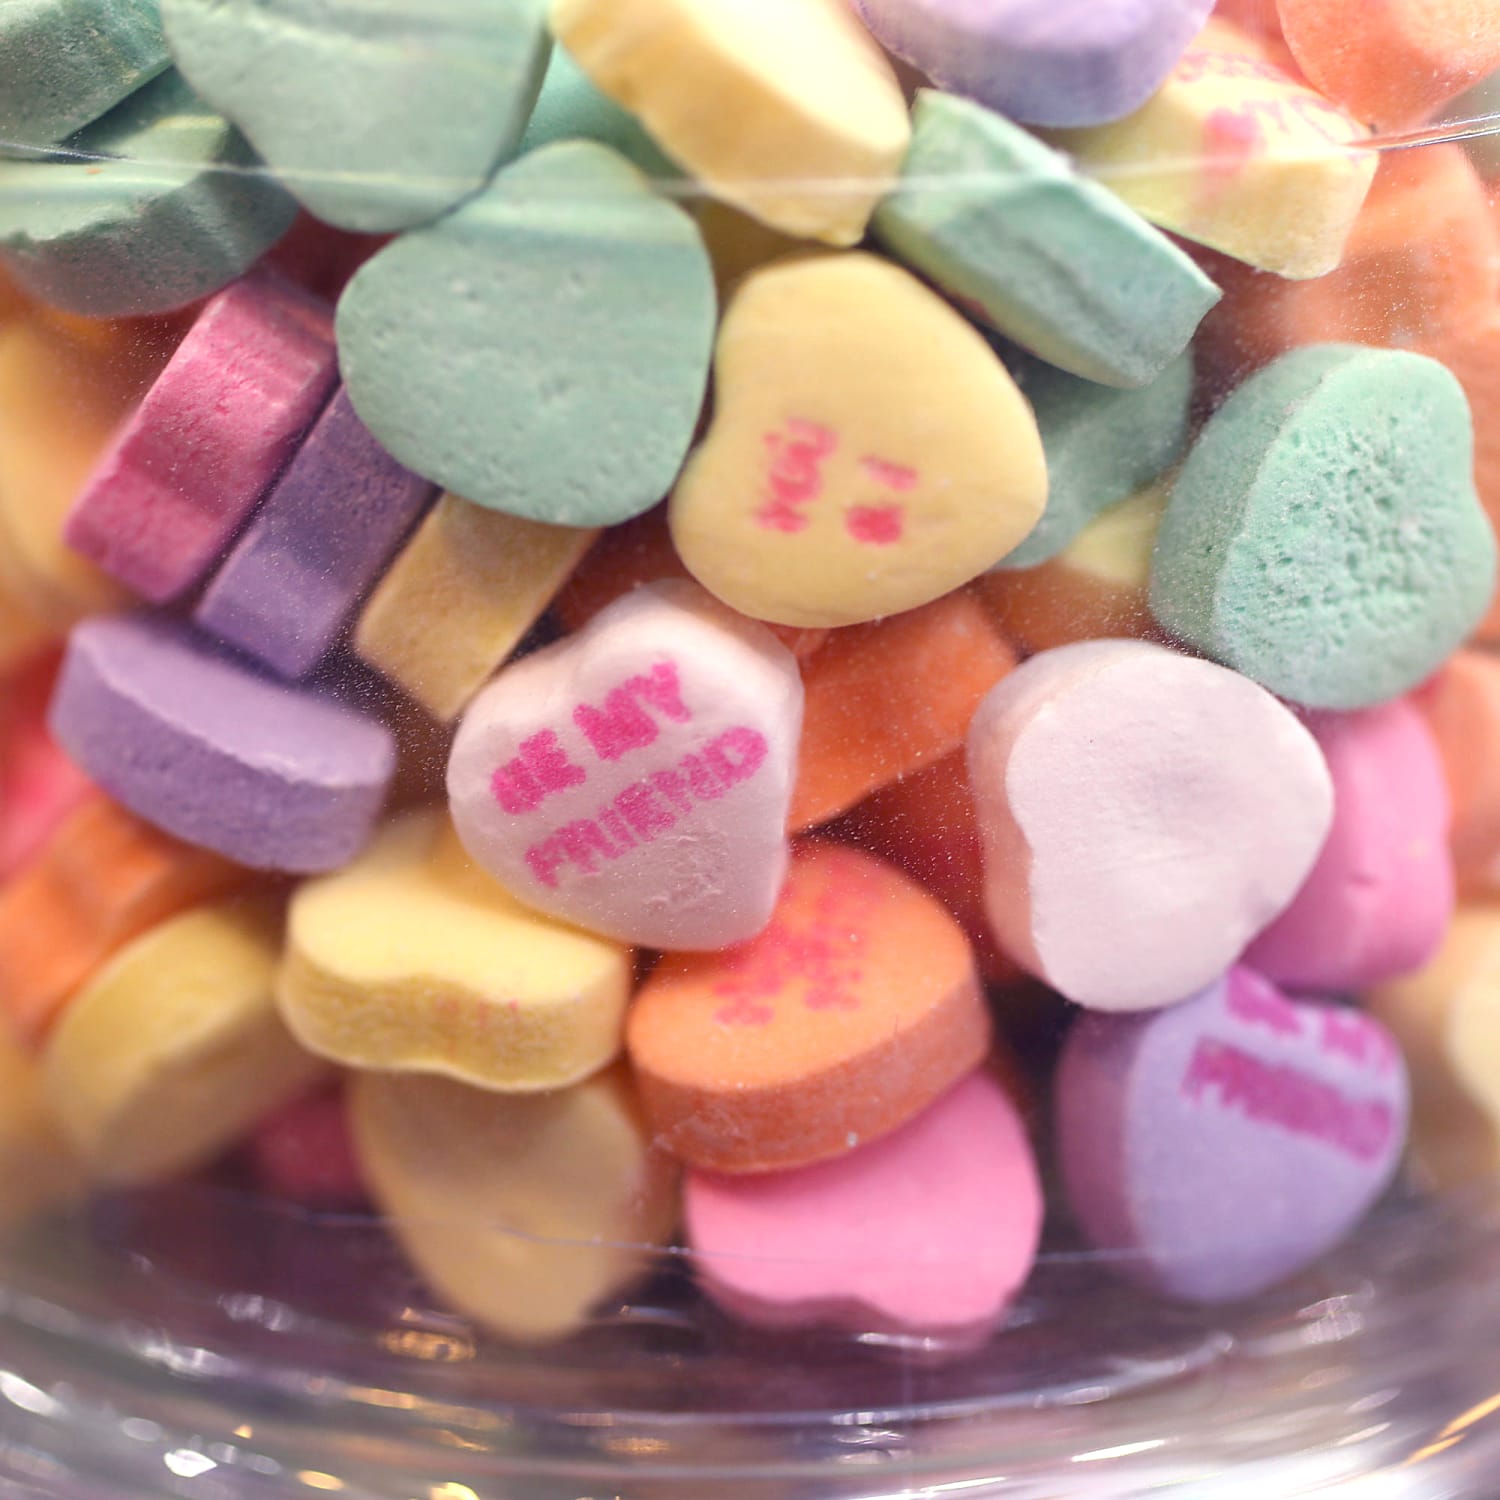 Sweethearts candies have returned but some won't be as sweet